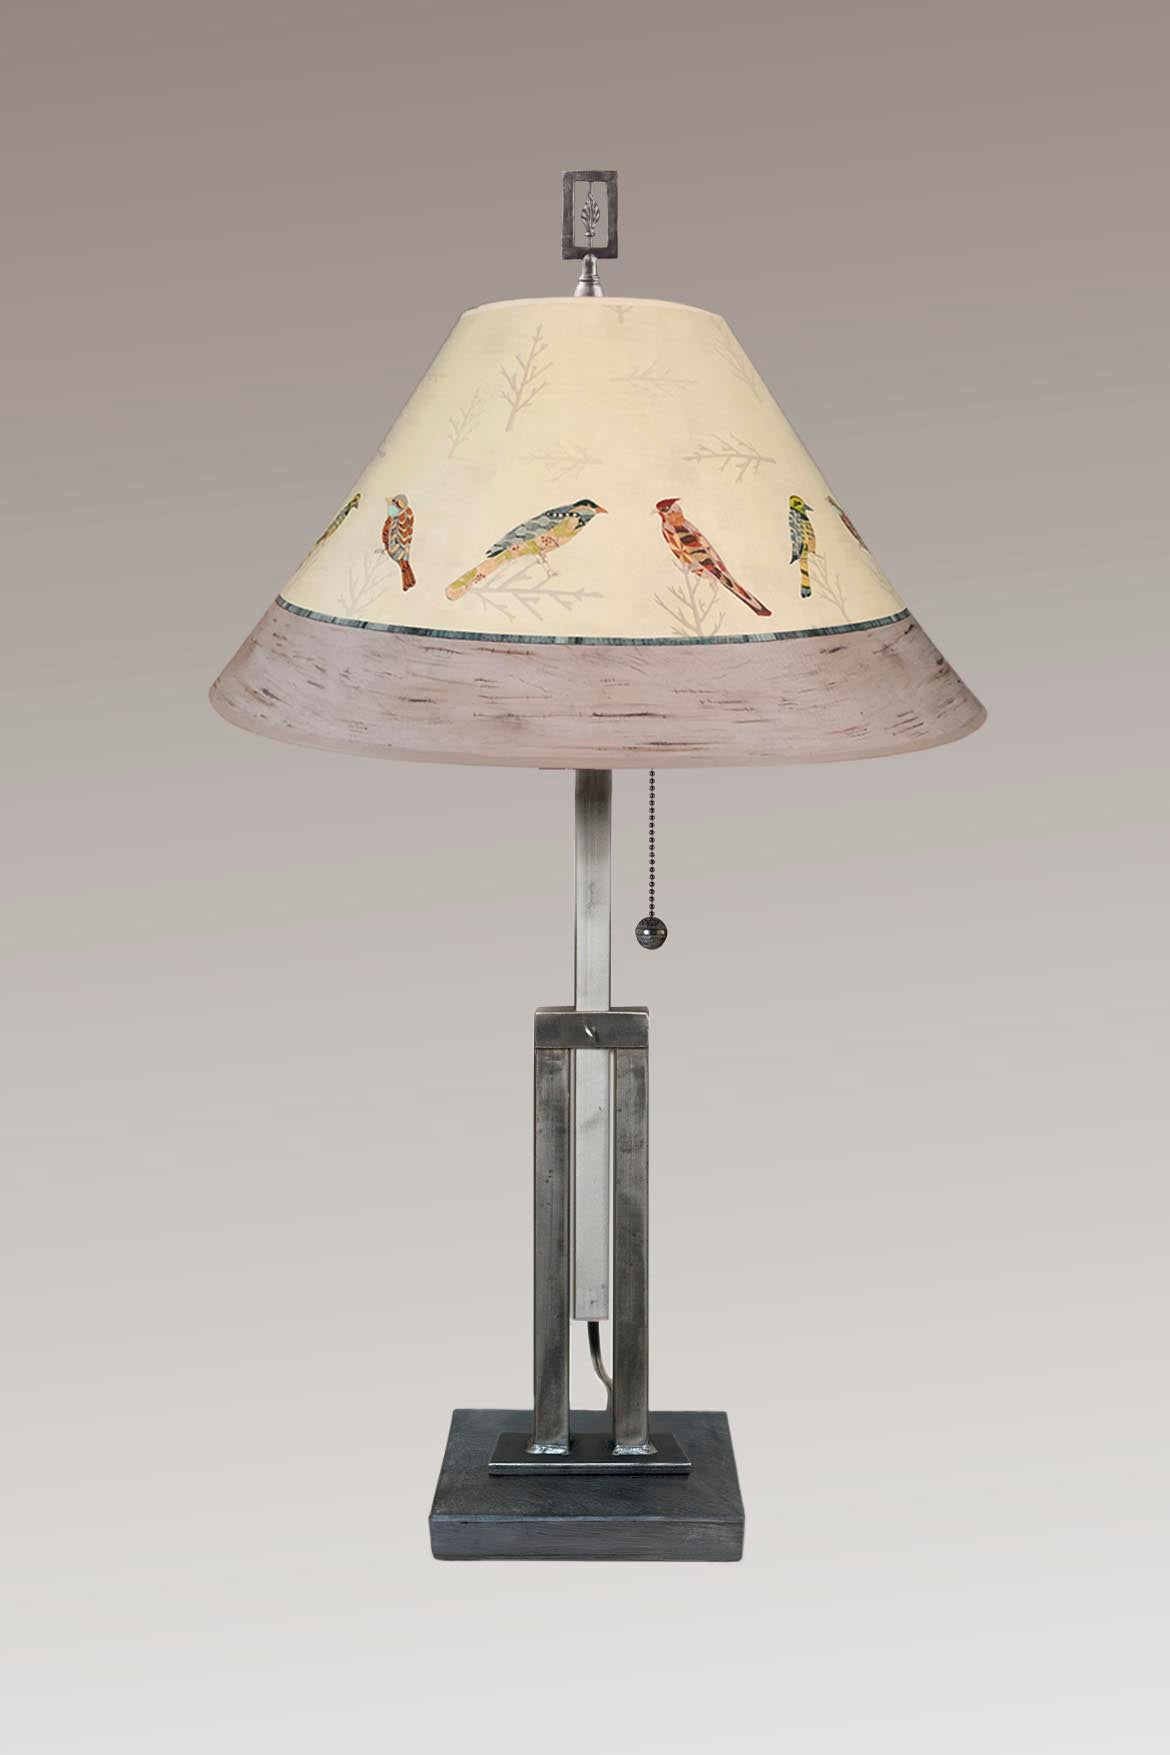 Adjustable-Height Steel Table Lamp with Large Conical Shade in Bird Friends